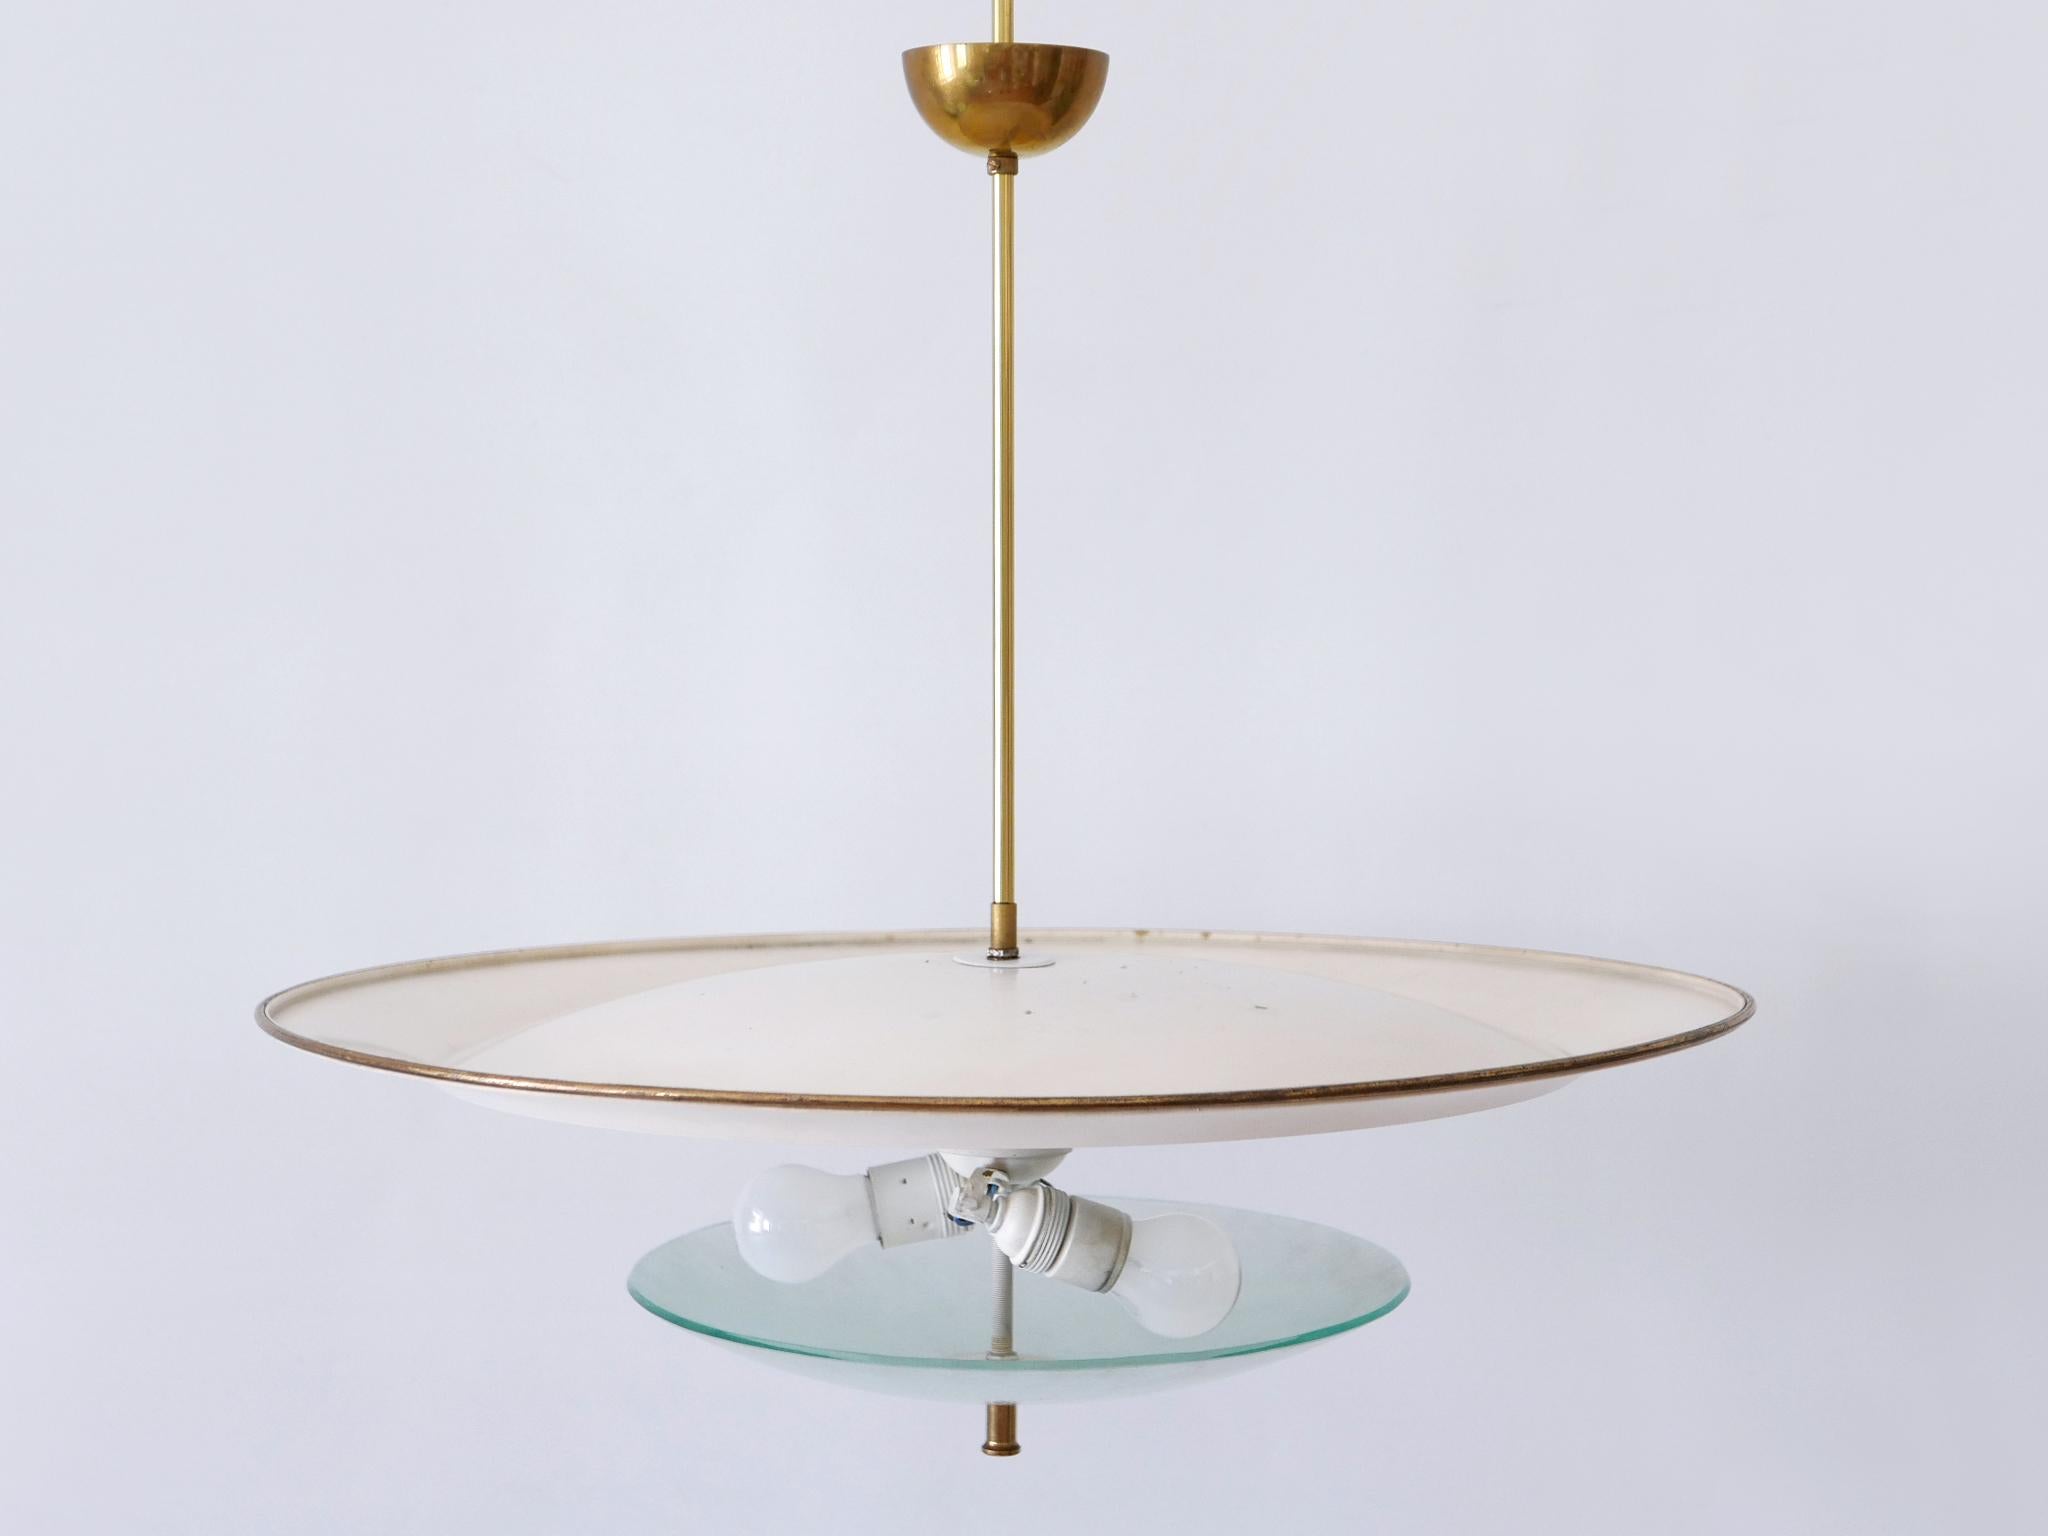 Large Mid-Century Modern 'Ufo' Ceiling Light or Pendant Lamp Germany 1950s № 3 In Good Condition For Sale In Munich, DE